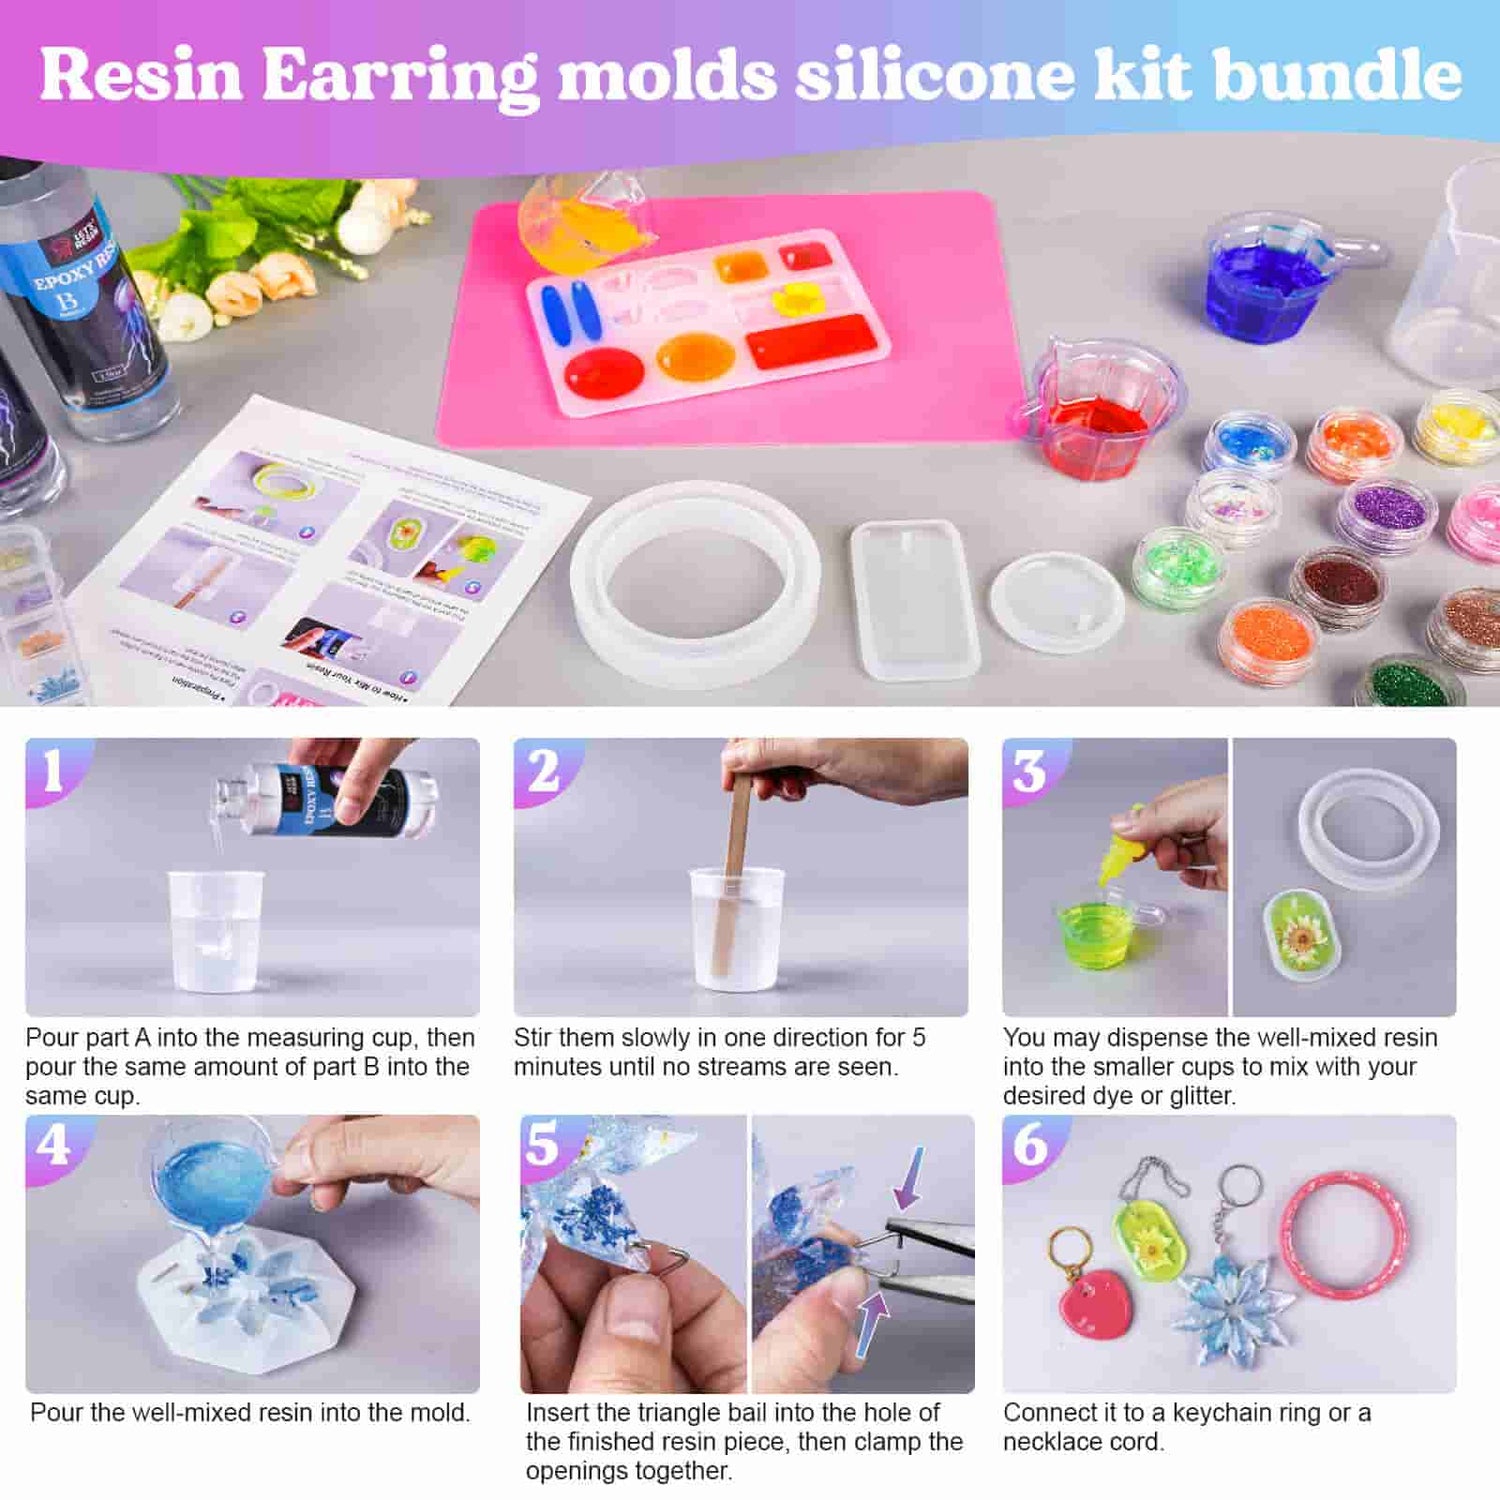  LET'S RESIN Resin Molds Silicone Kit for Making Domino,Epoxy  Resin Starter Kit for Beginners, Resin Kits and Molds Complete Set Includes  9.8oz Epoxy Resin, Epoxy Molds,and Resin Supplies : Arts, Crafts